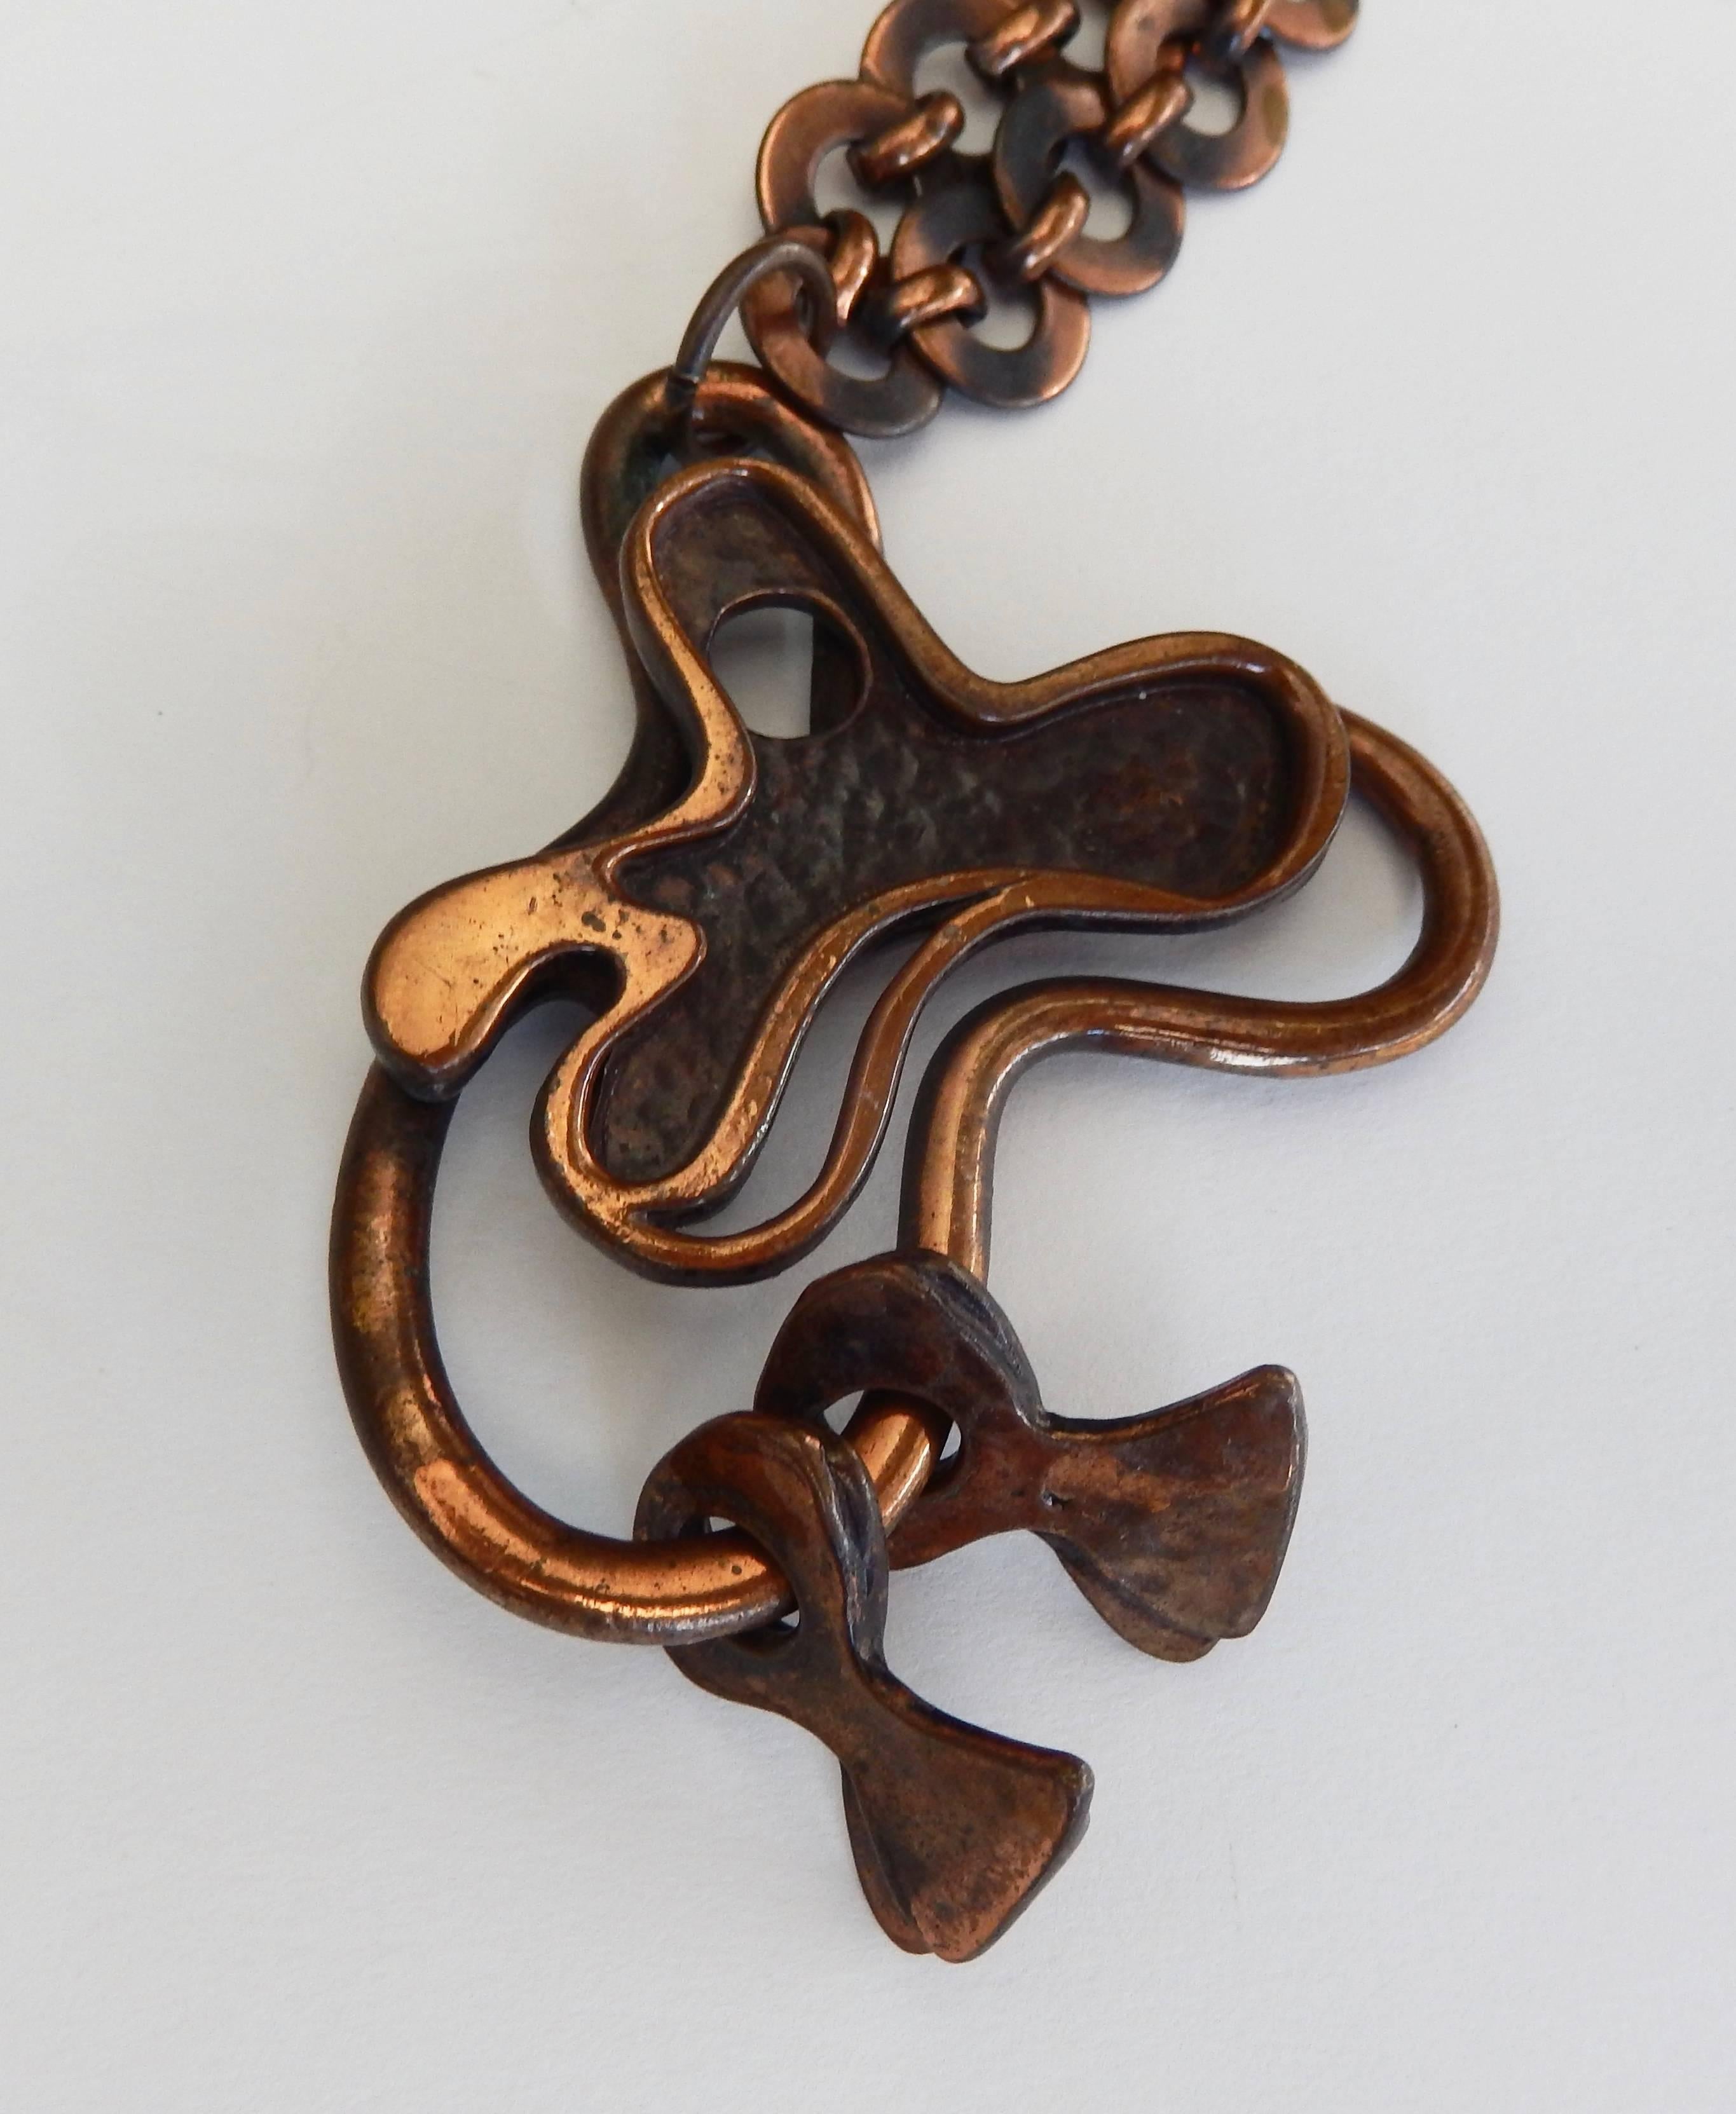 An abstract cast copper pendant with moveable forms by the mid-century modernist Francisco Rebajes (1907-1990). A master craftsman, Rebajes is best known for his innovative metalwork in copper in the 1950s.  The abstract design reflects his interest